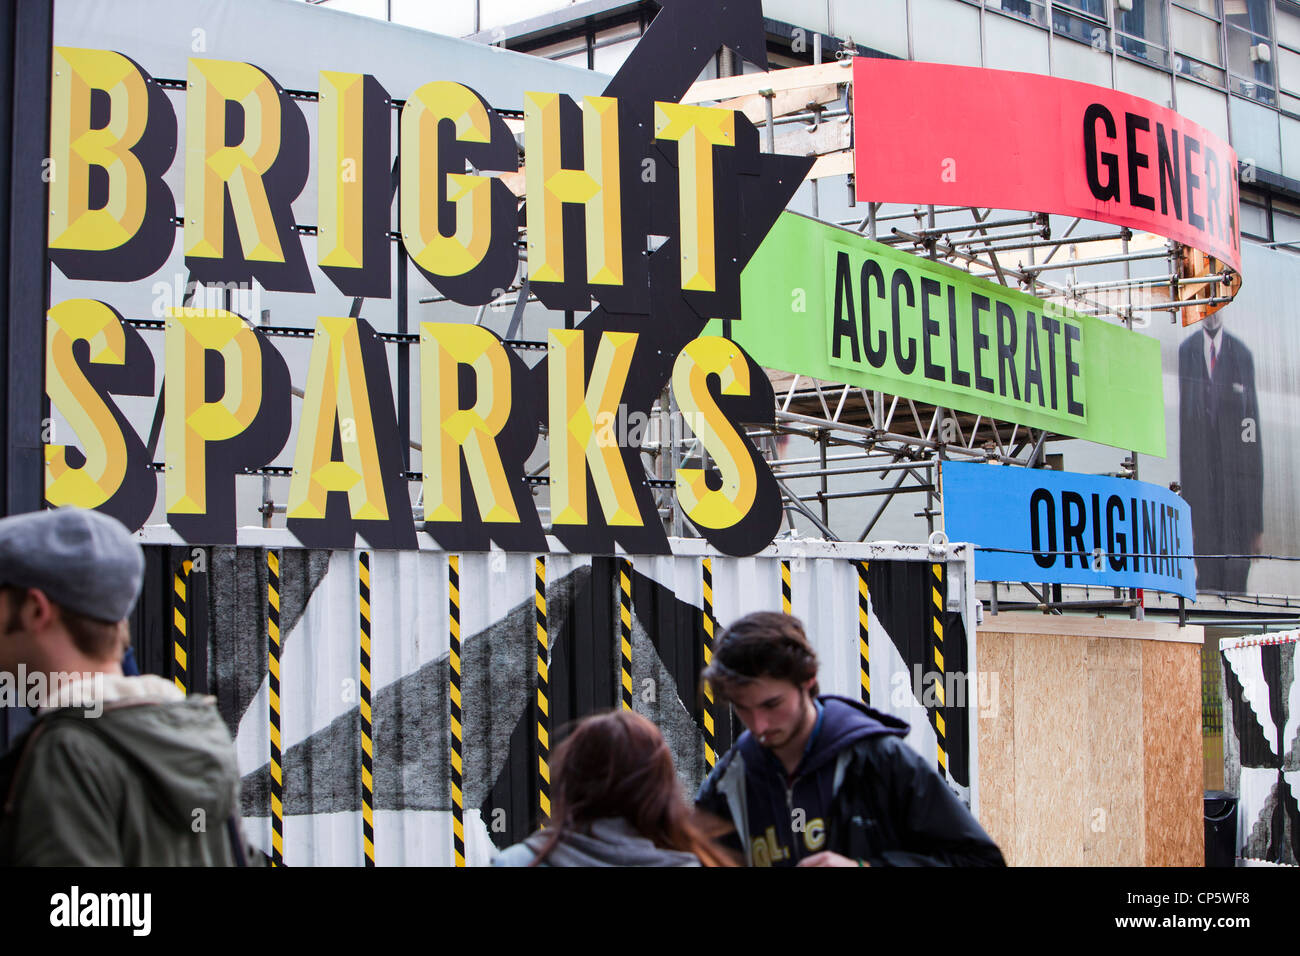 Bright Sparks, a photo journalism project to document life around the Elephant and Castle, in London, UK. Stock Photo